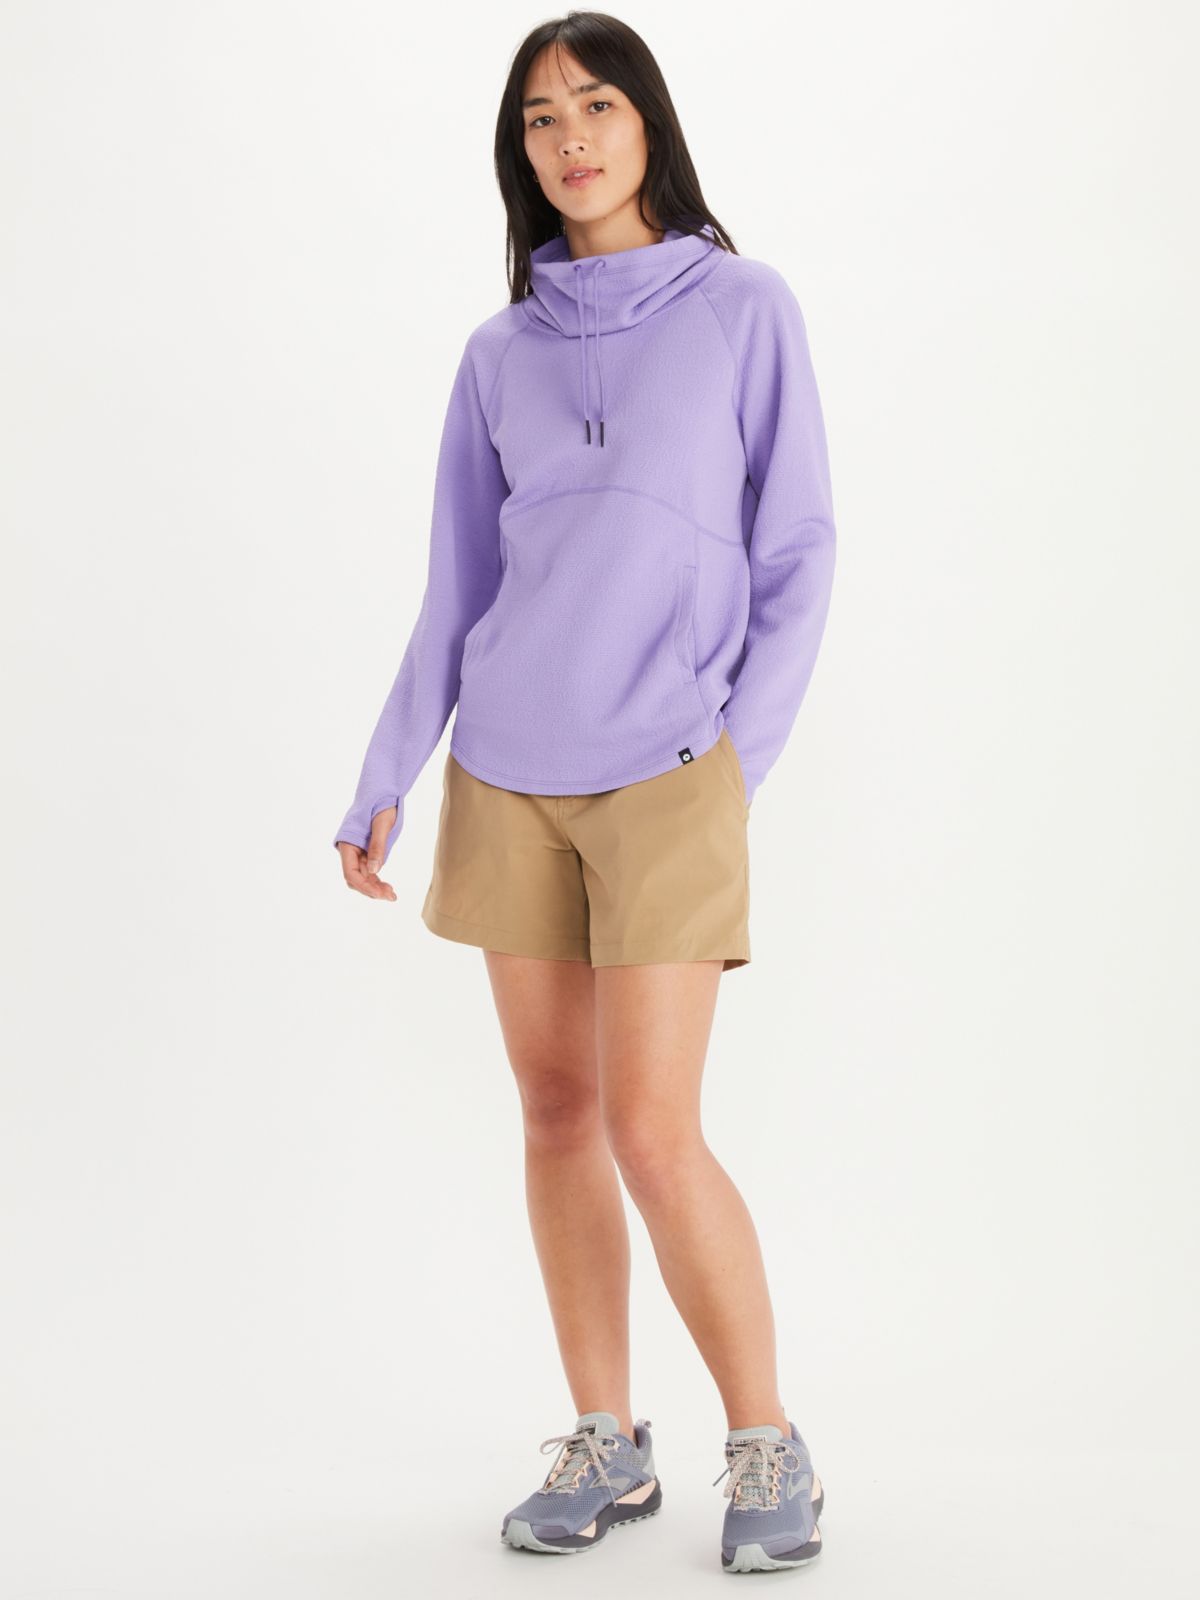 women's pullover hoodie and women's shorts on woman